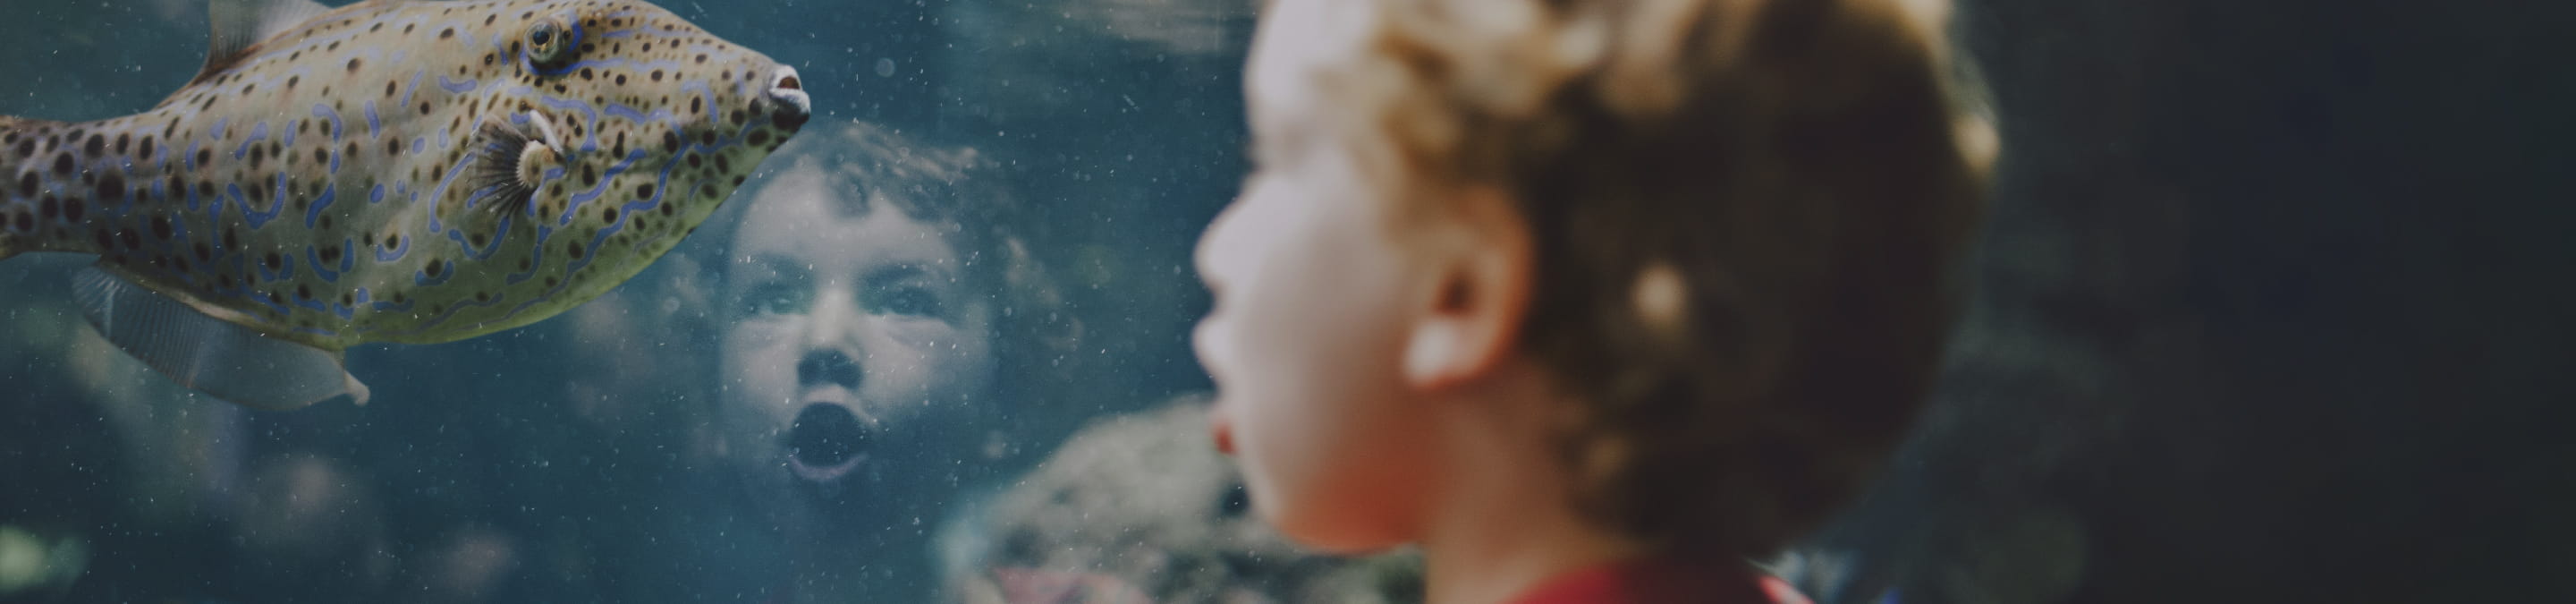 a boy looking at a fish in a fish tank